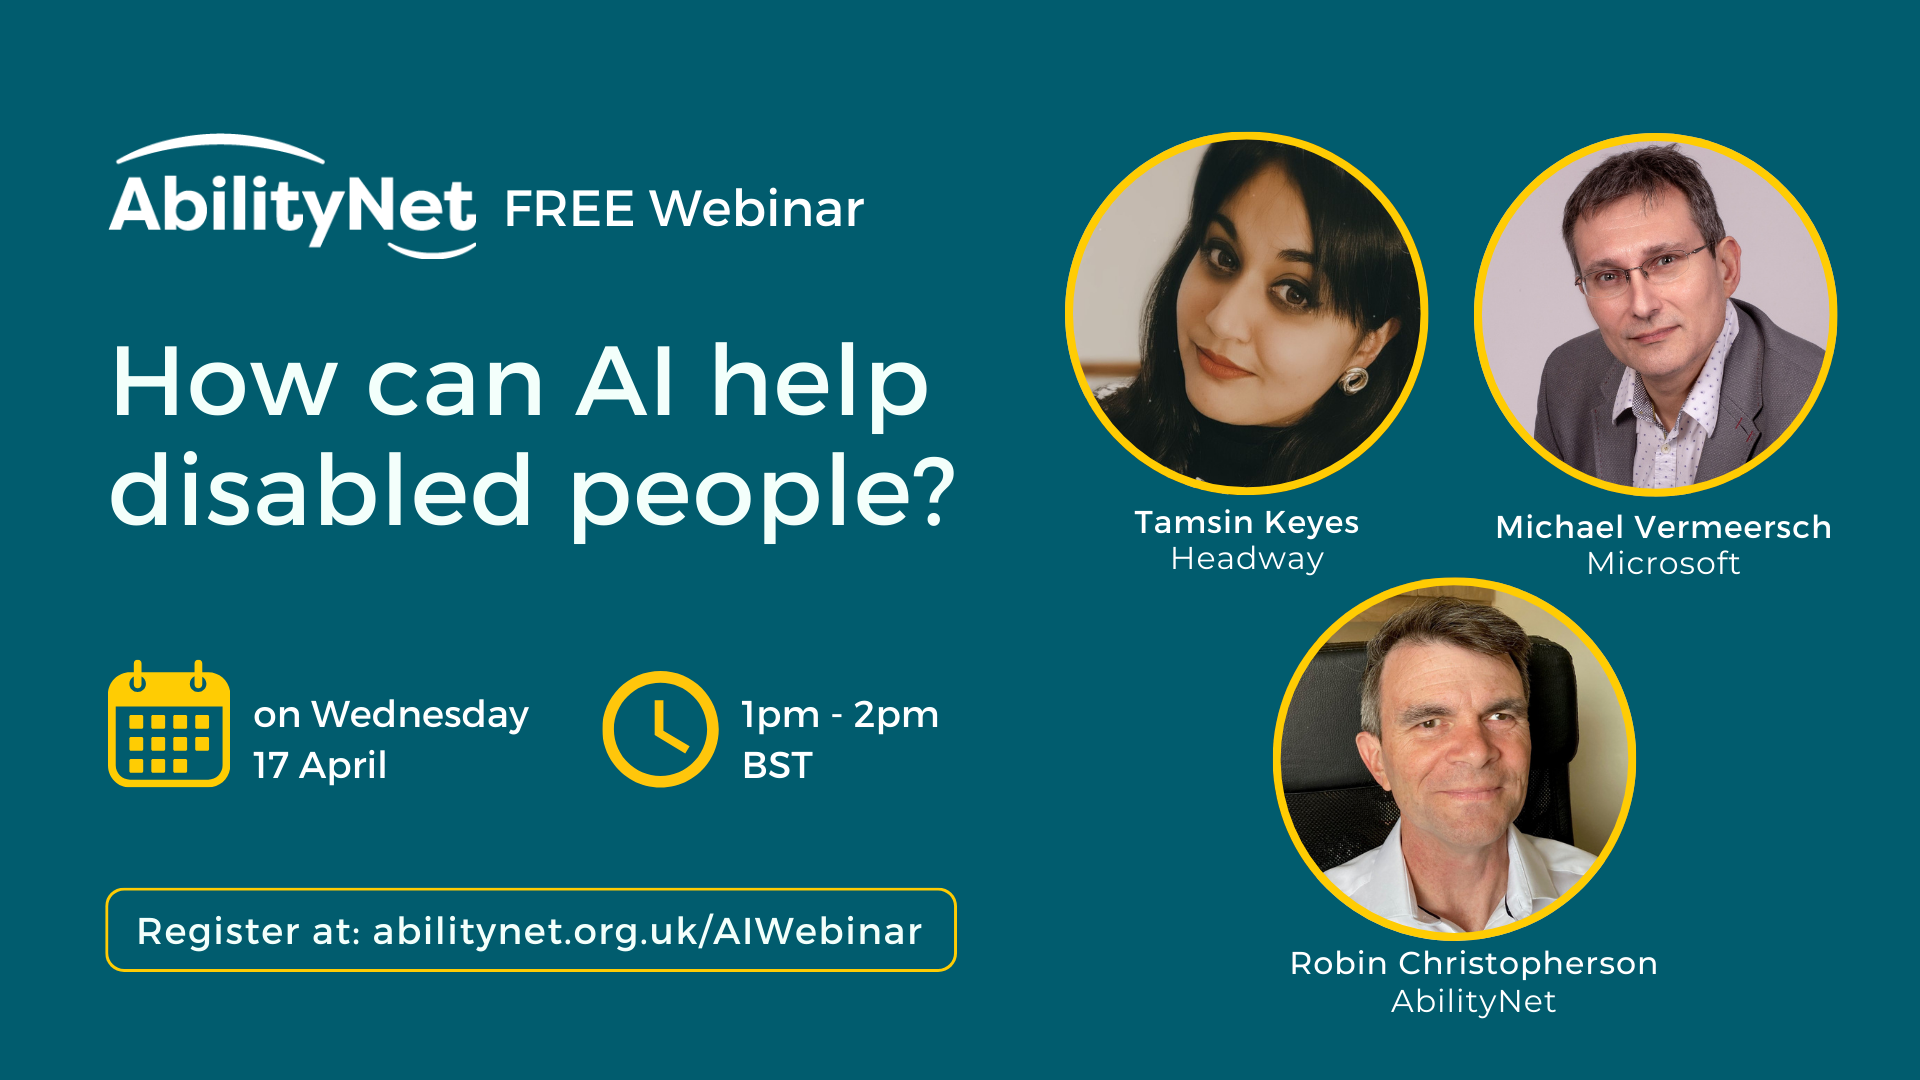 Graphic containing images of Robin Christopherson (AbilityNet), Tamsin Keyes (Headway) and Michael Vermersch (Microsoft) noting webinar How Can AI Help Disabled People? is on Wed 17 April 1-2pm BST